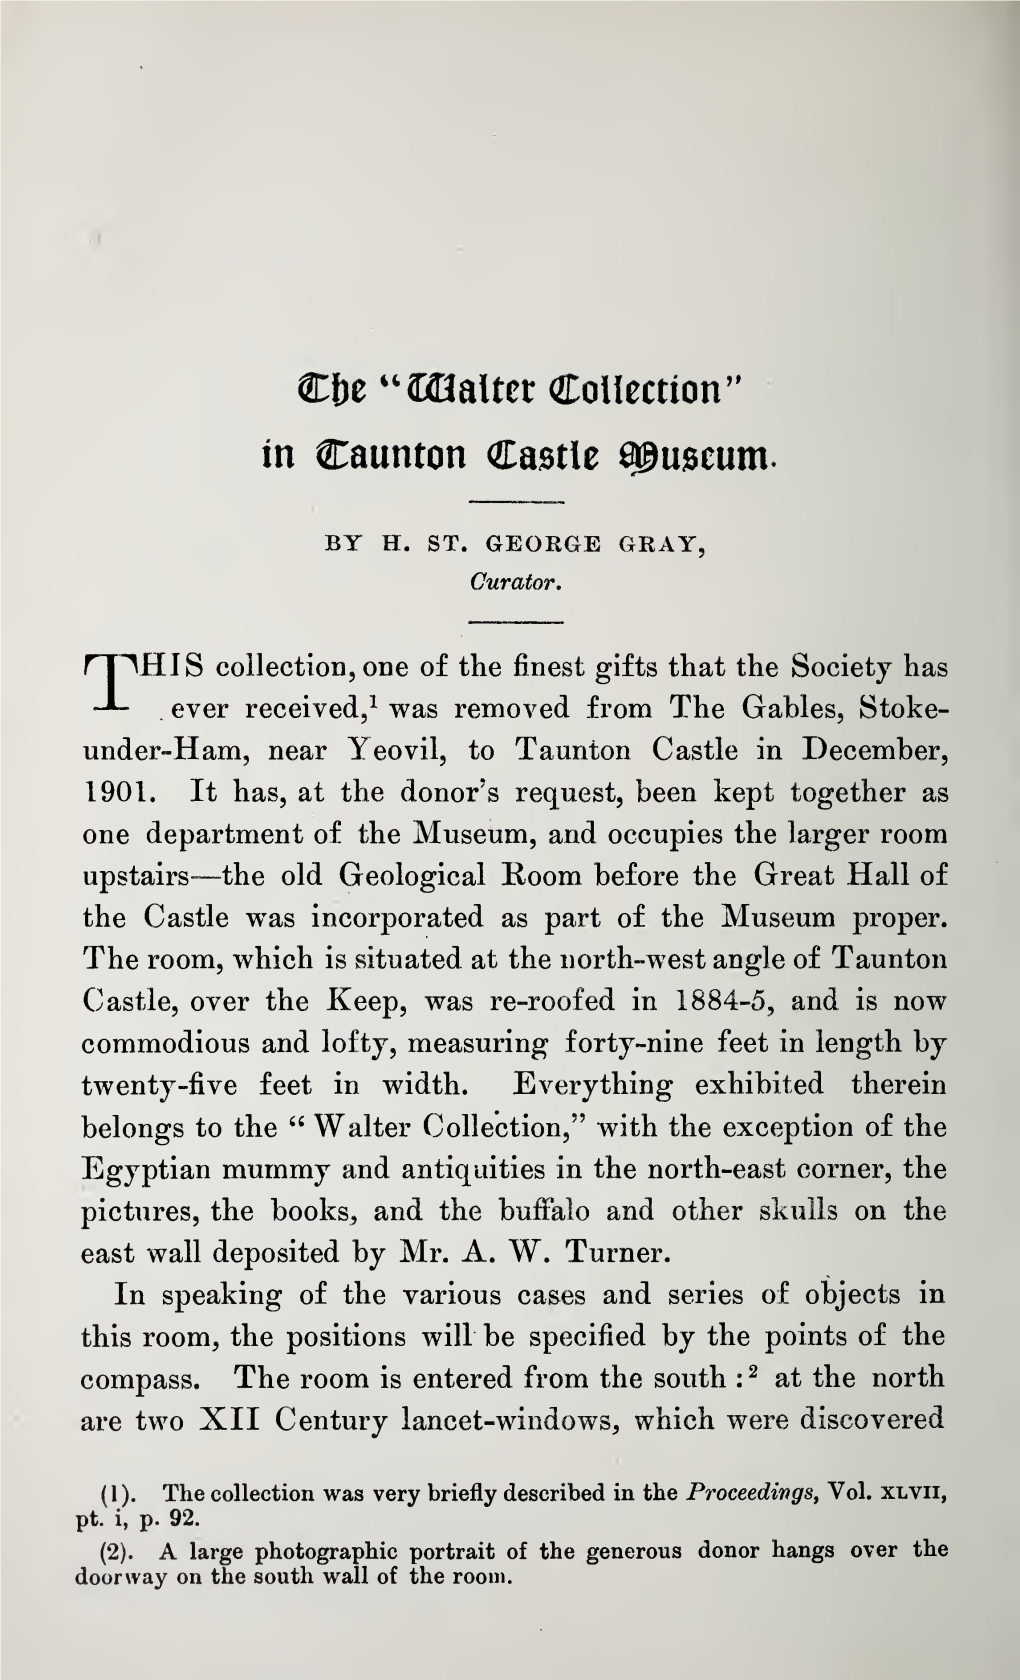 St. George Gray, H, the “Walter Collection” in Taunton Castle Museum, Part II, Volume 48